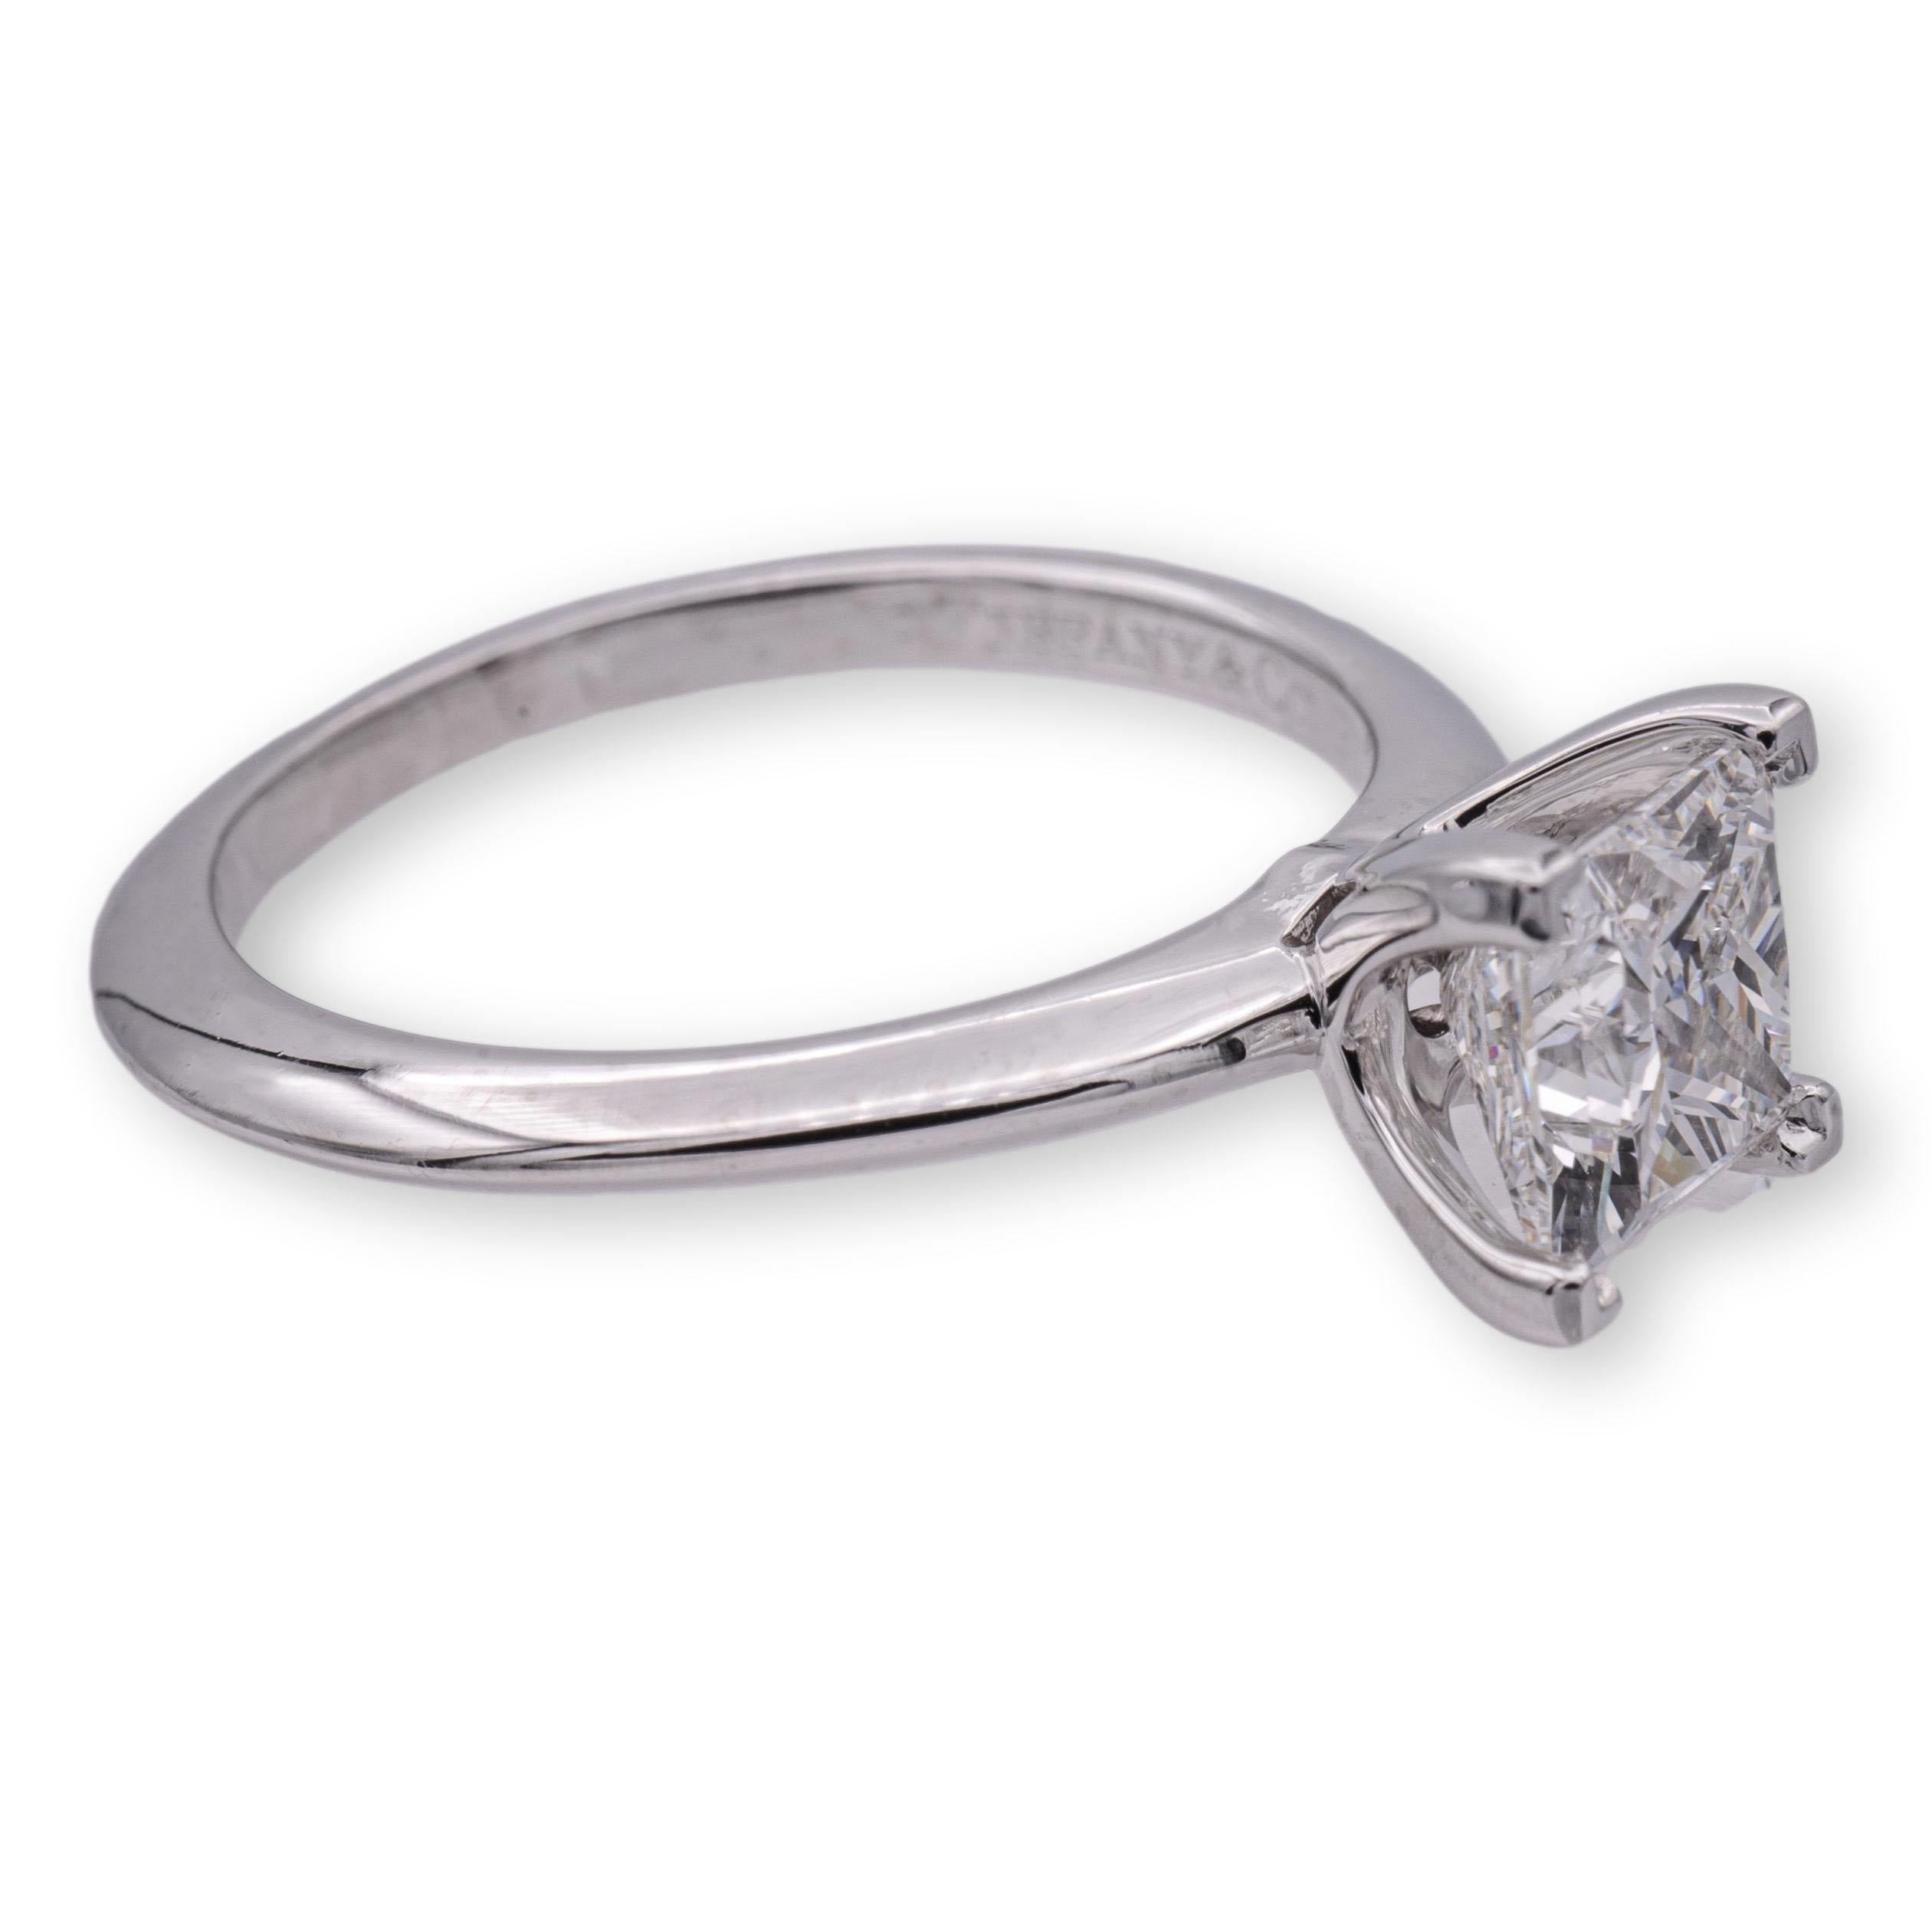 Contemporary Tiffany and Co. Platinum Diamond Engagement Ring 1.04 Ct Princess Solitaire FVS1